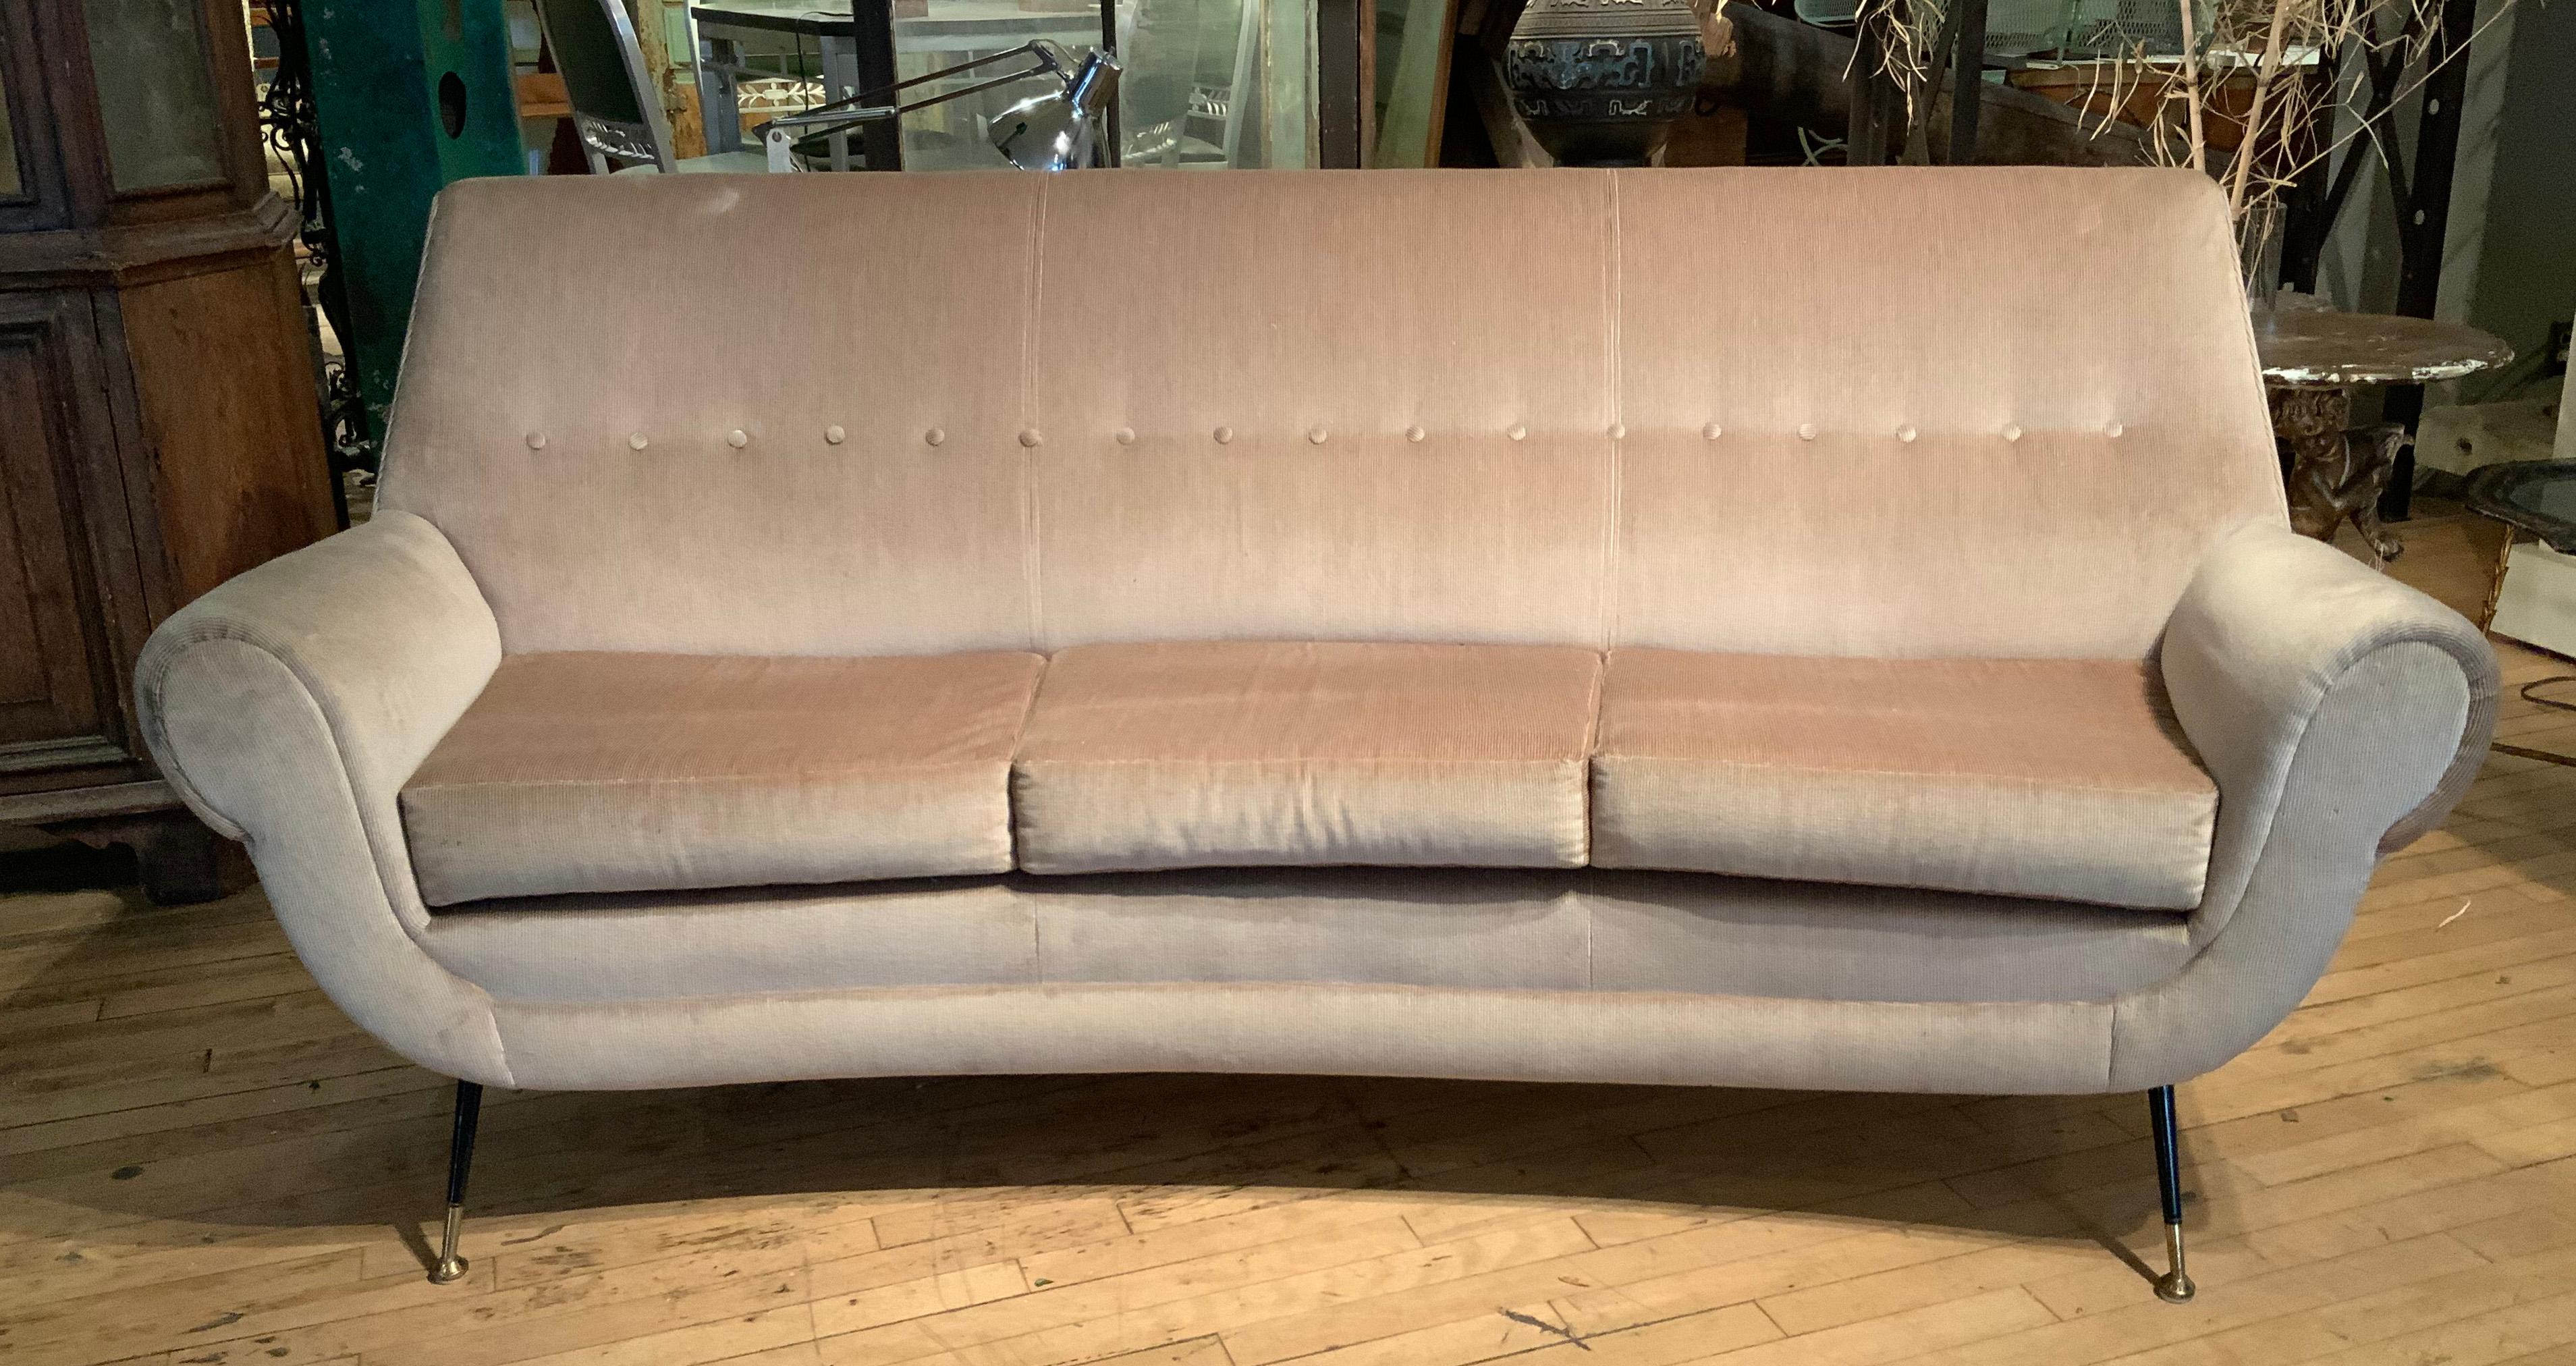 1950s couch for sale